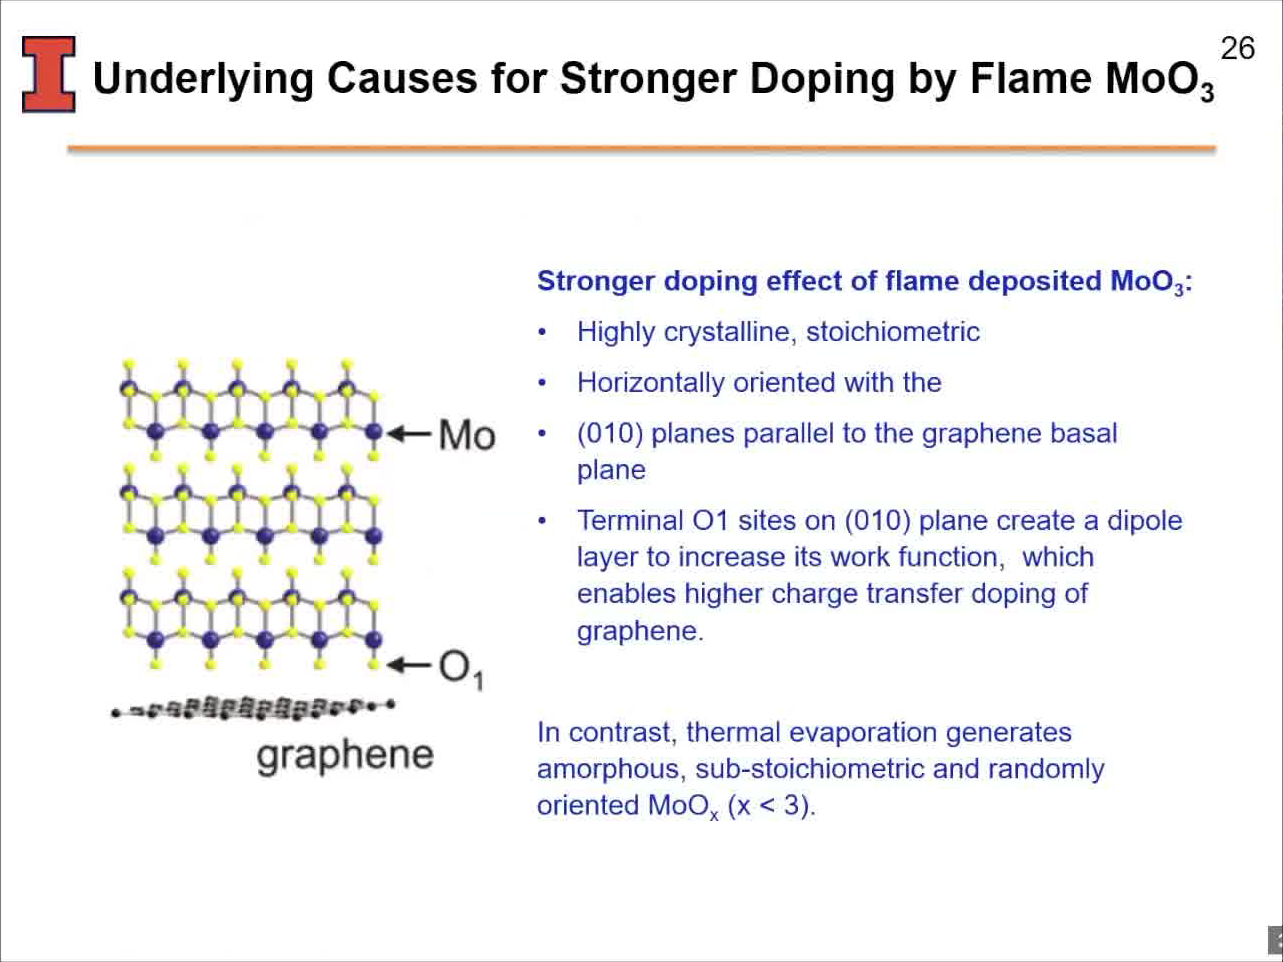 Underlying Causes for Stronger Doping by Flame MoO3